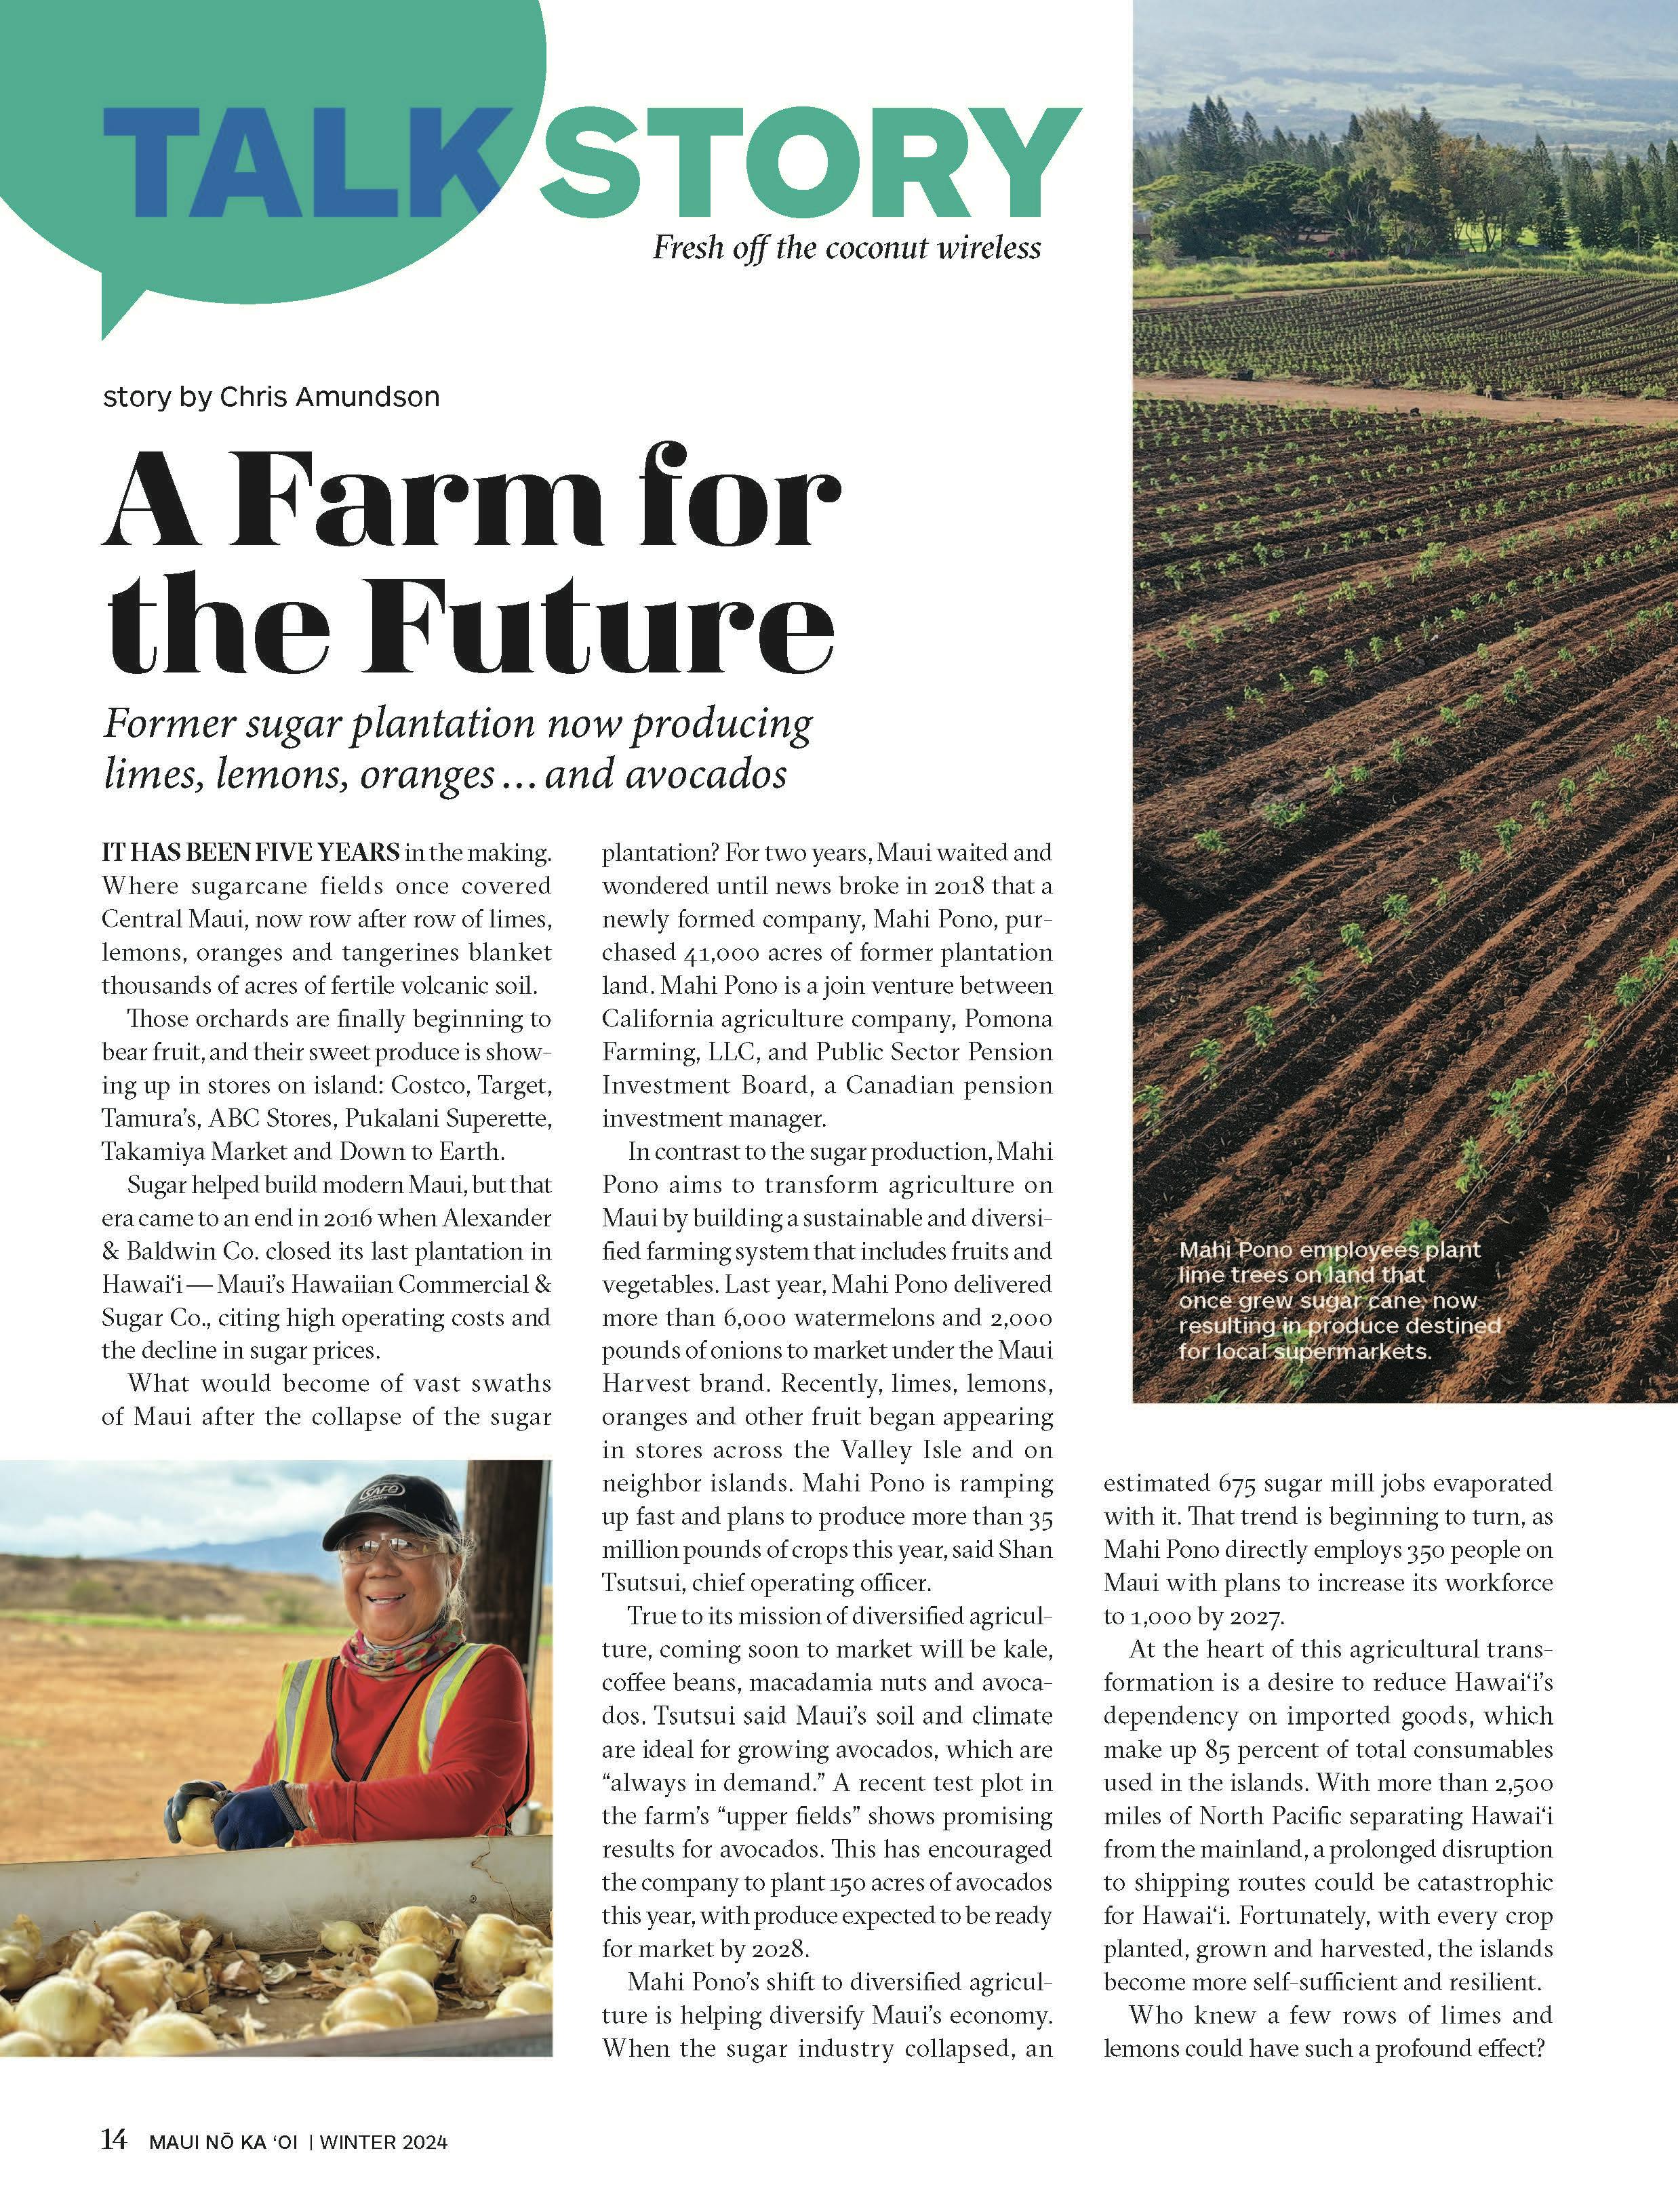 "Talk Story" A Farm for the Future article